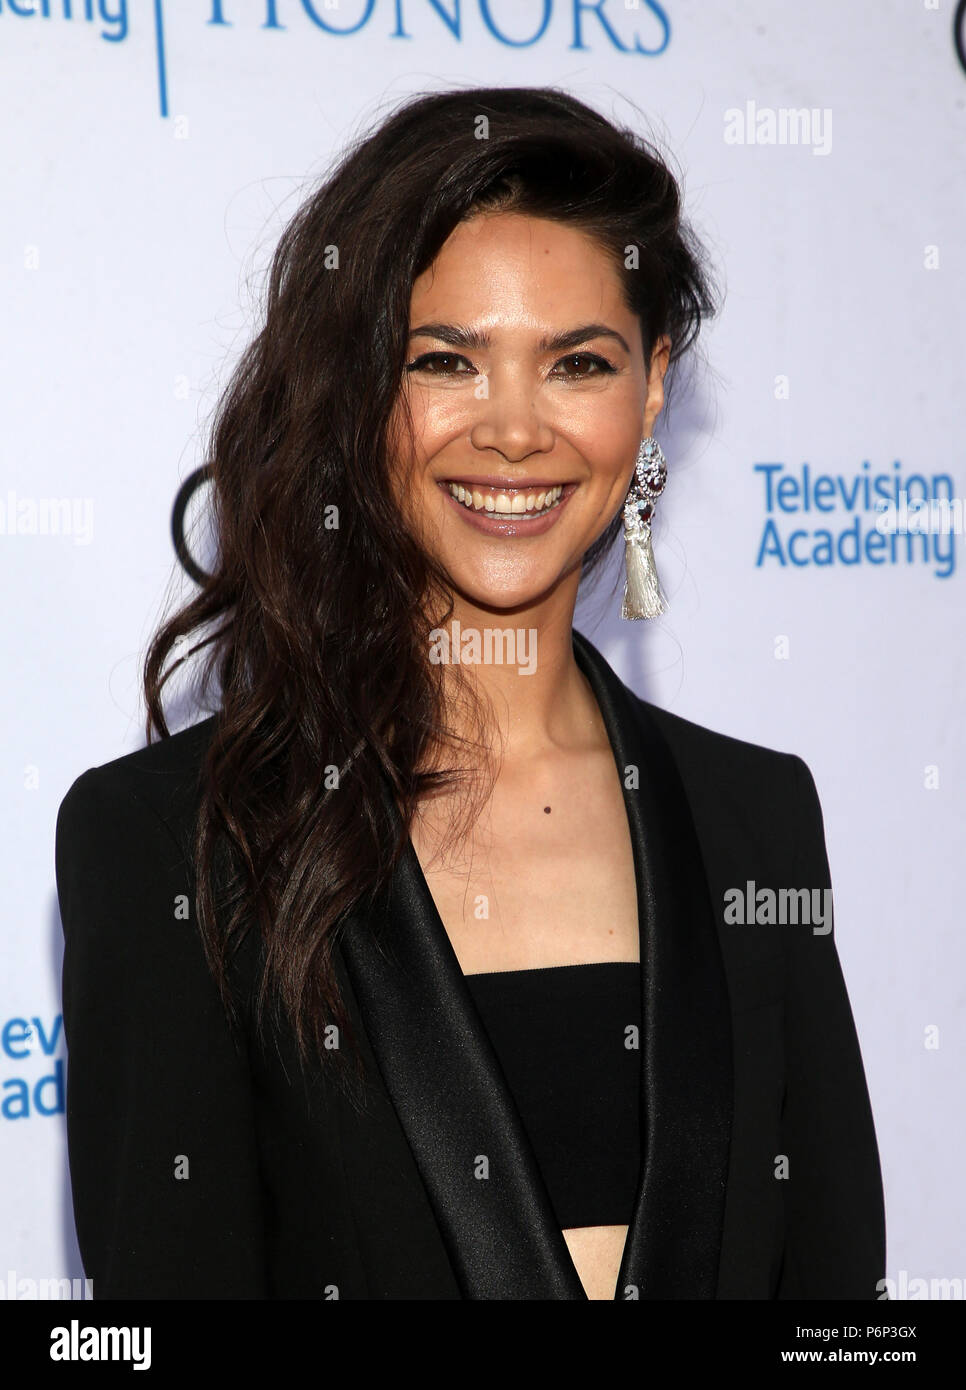 11th Annual Television Academy Honors  Featuring: Lilan Bowden Where: Hollywood, California, United States When: 31 May 2018 Credit: FayesVision/WENN.com Stock Photo